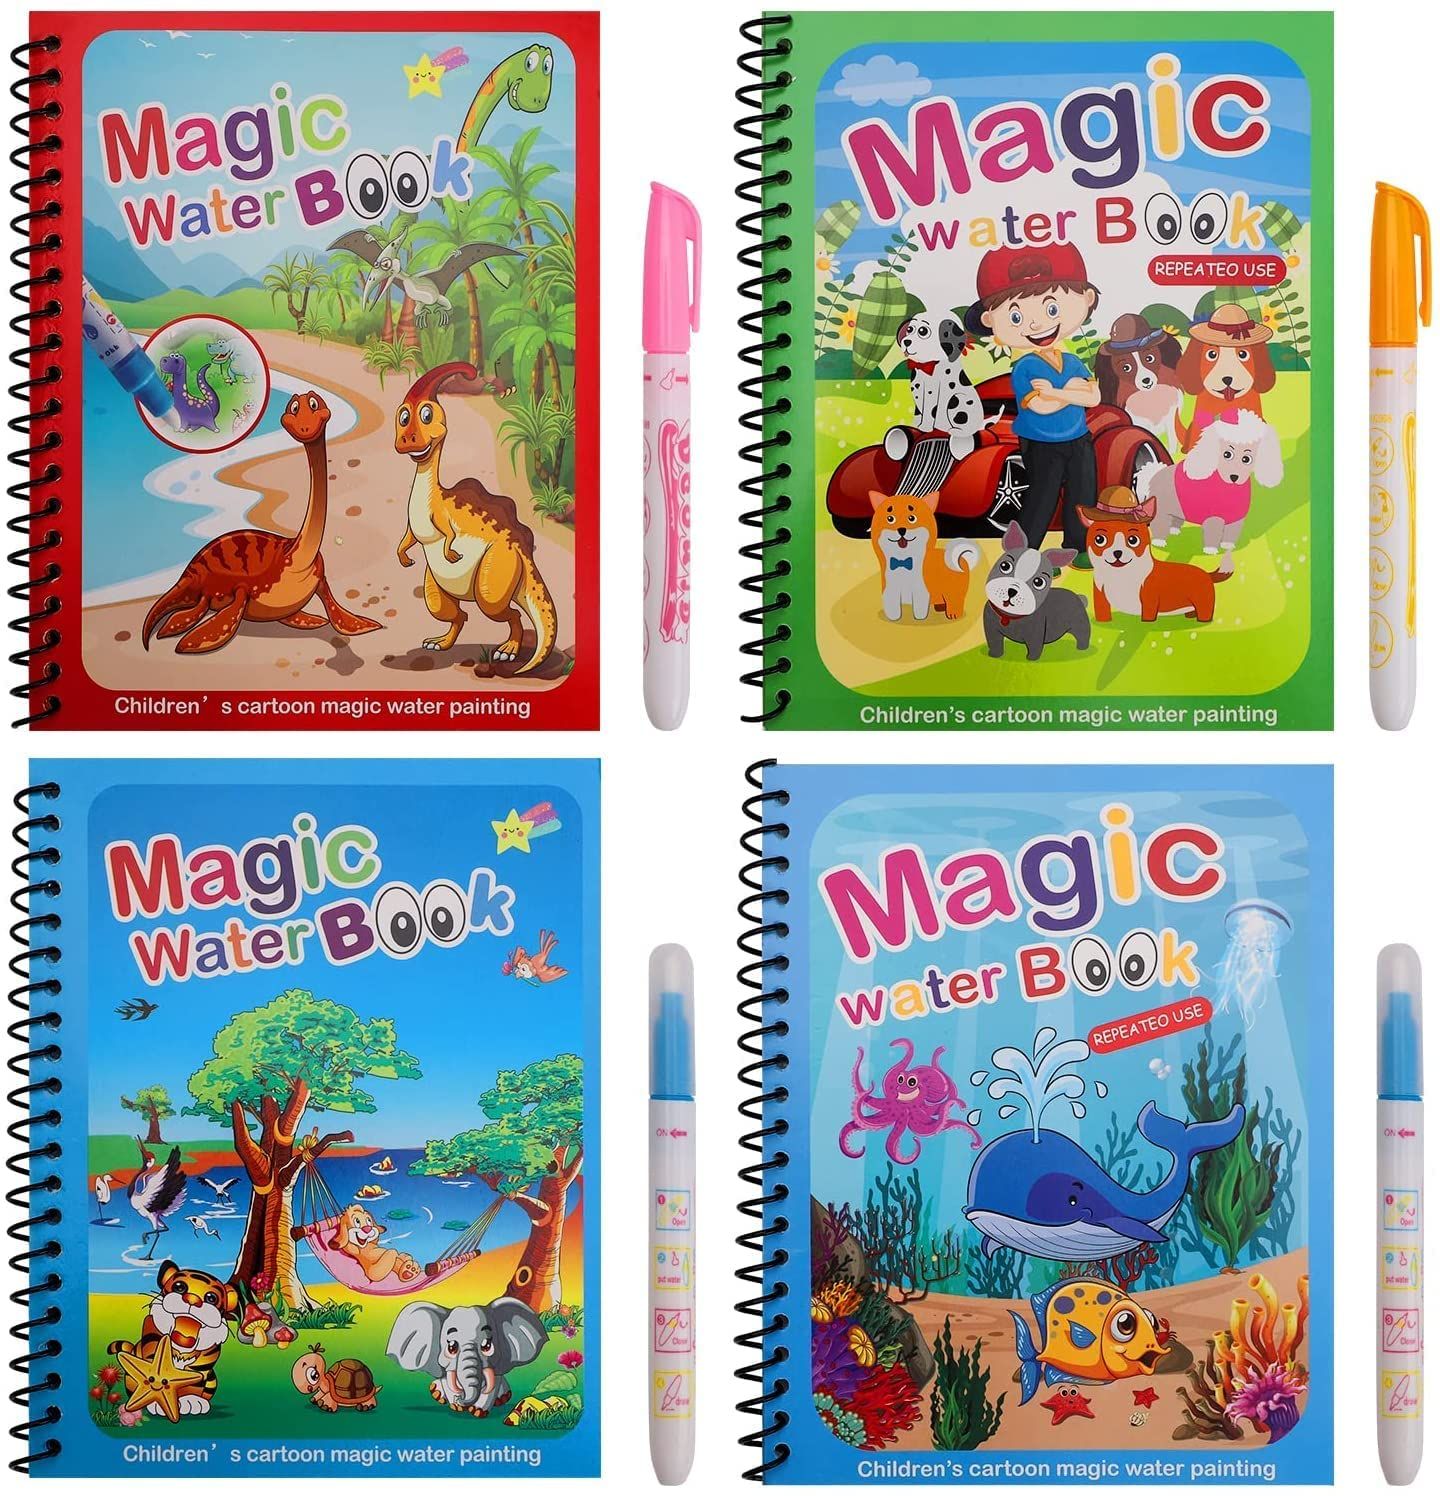 Magic Water Book For Kids With Magical Water Doodle Pen, Reusable Self Drying Water Painting Books, Best Montessori Toy Gift, Age 3+ Years, Pack Of 4